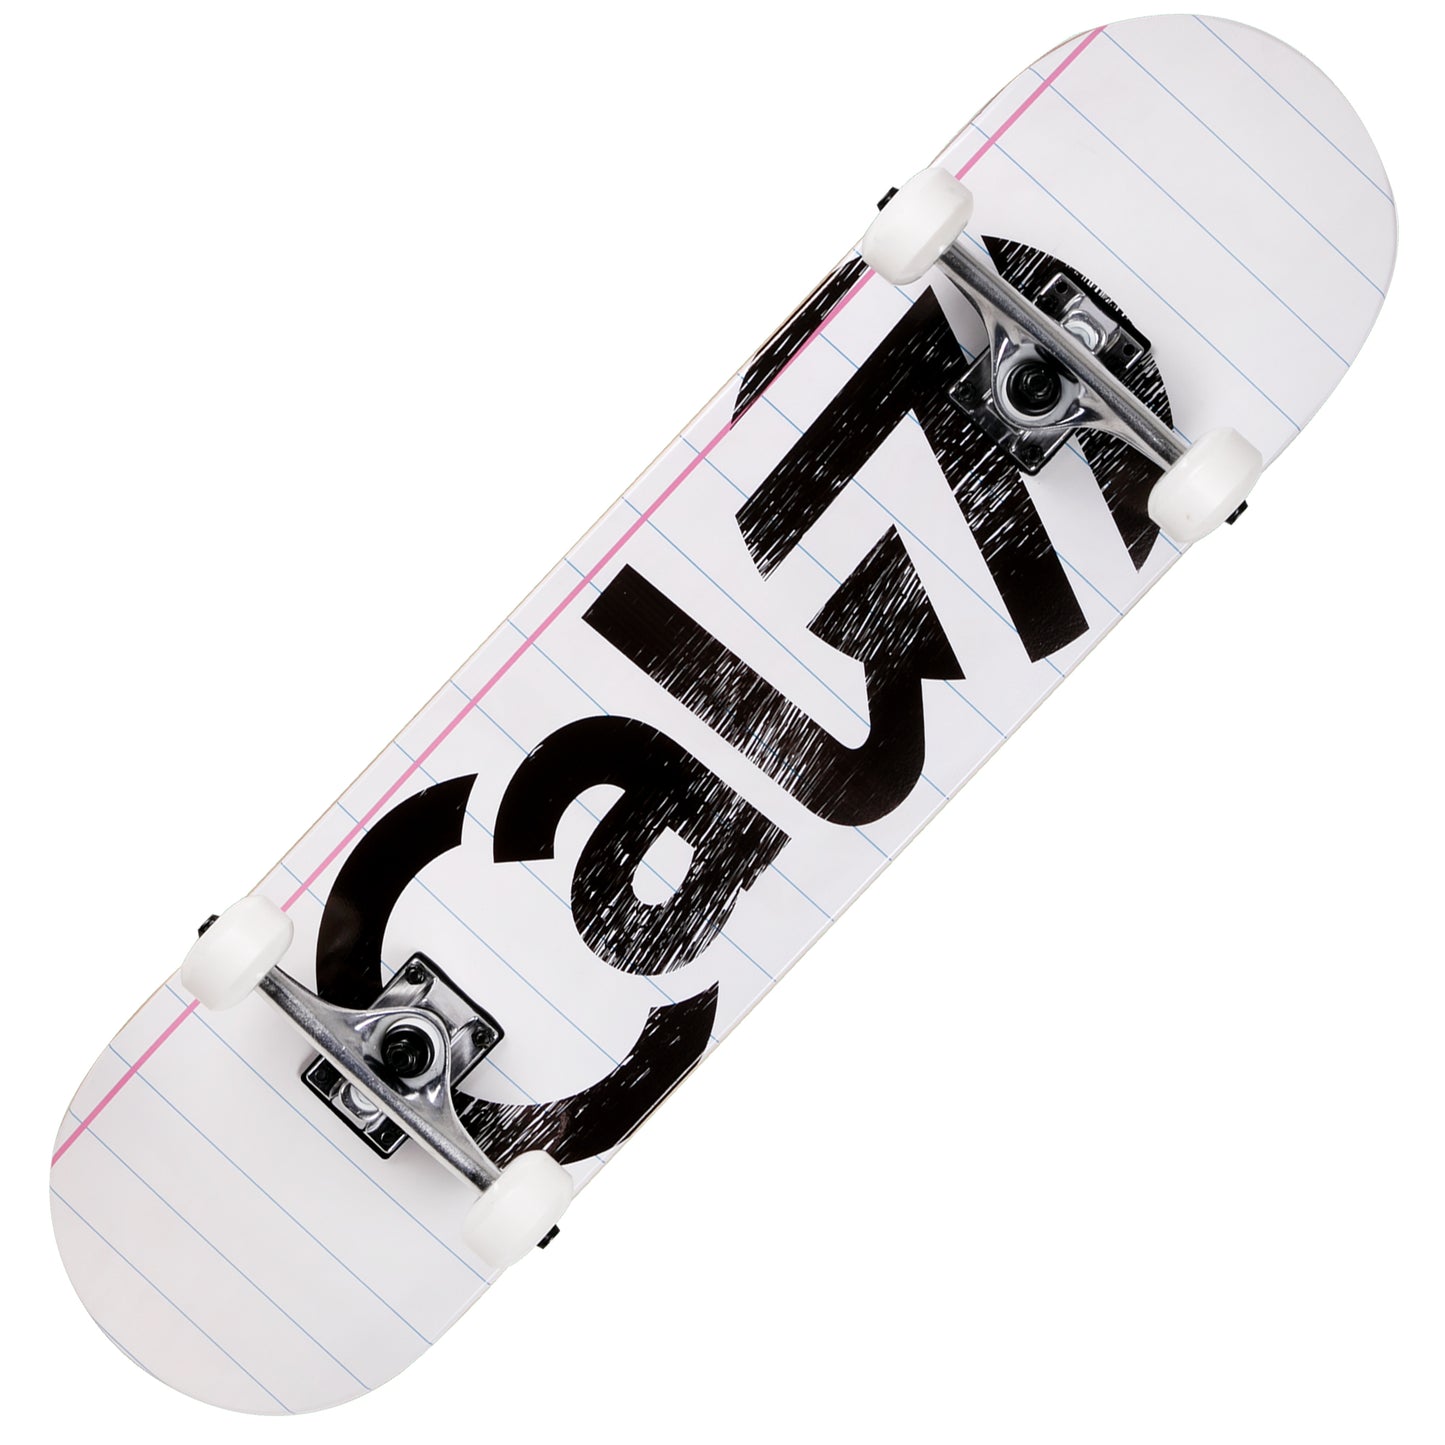 Cal 7 complete 8-inch Dropout skateboard with notebook graphic